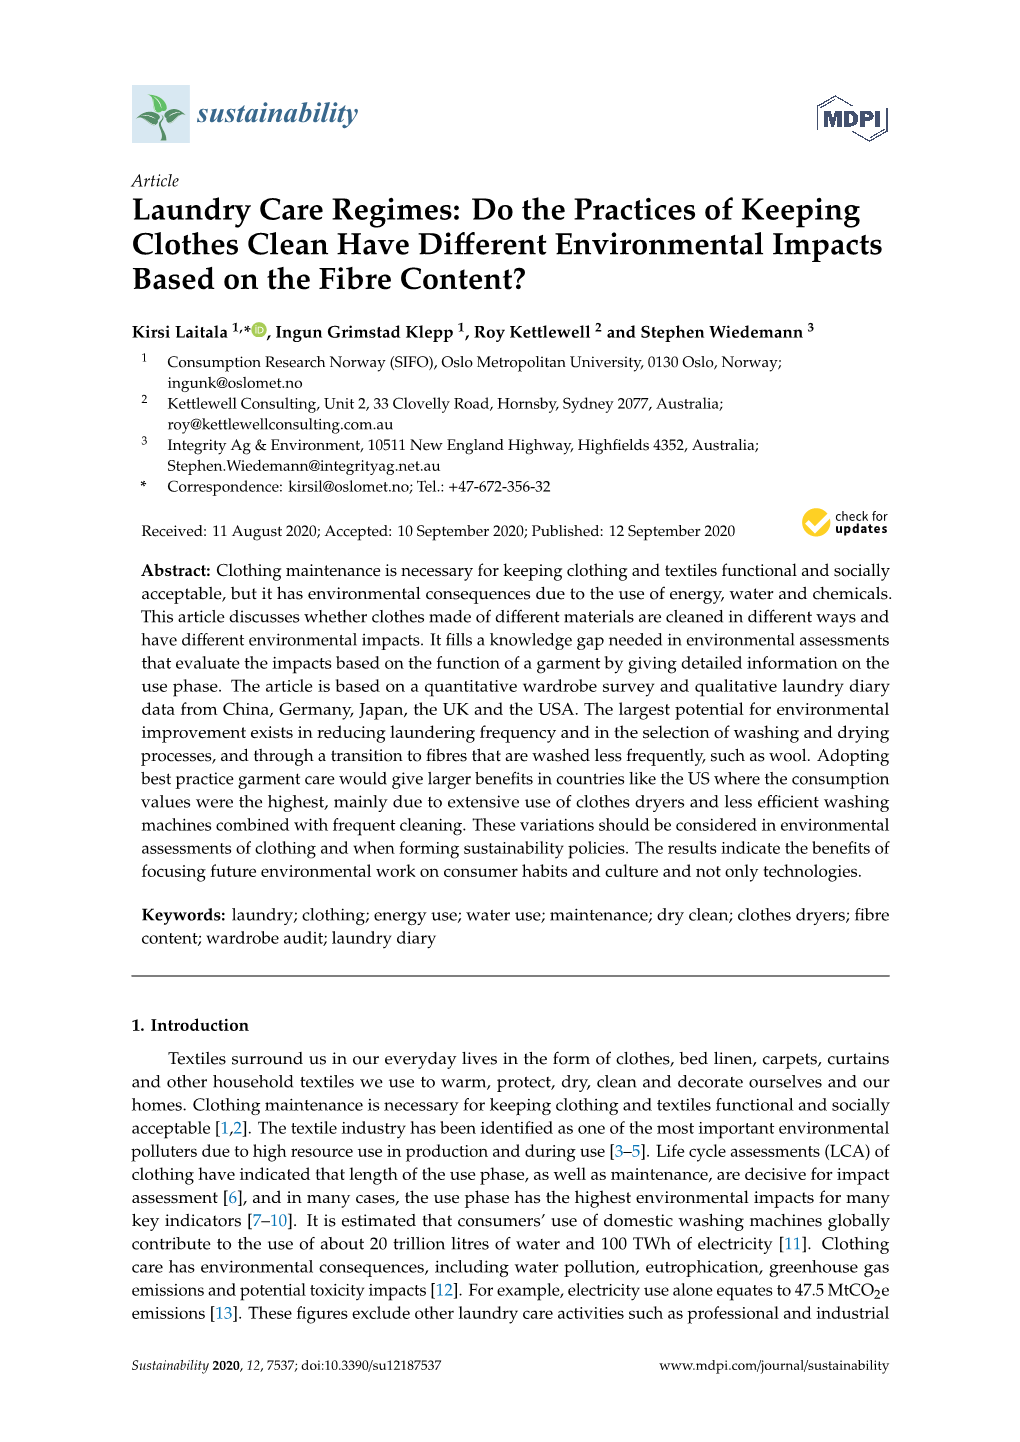 Laundry Care Regimes: Do the Practices of Keeping Clothes Clean Have Diﬀerent Environmental Impacts Based on the Fibre Content?